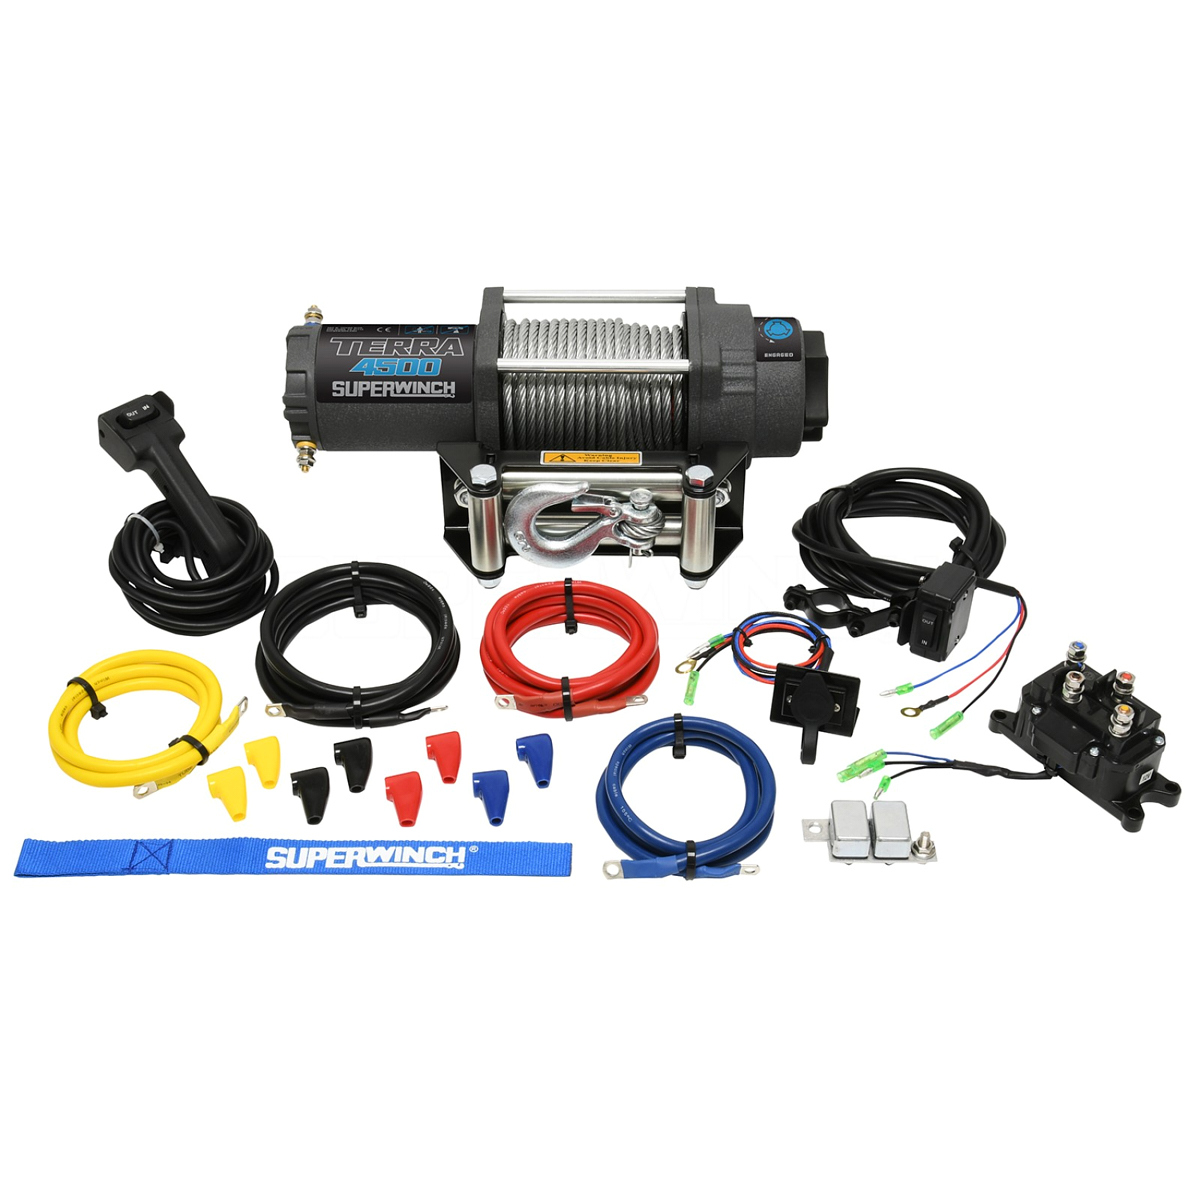 SuperWinch 1145260 Winch, Terra, 4500 lb Capacity, Roller Fairlead, 10 ft Remote, 15/64 in x 50 ft Steel Rope, 12V, Kit